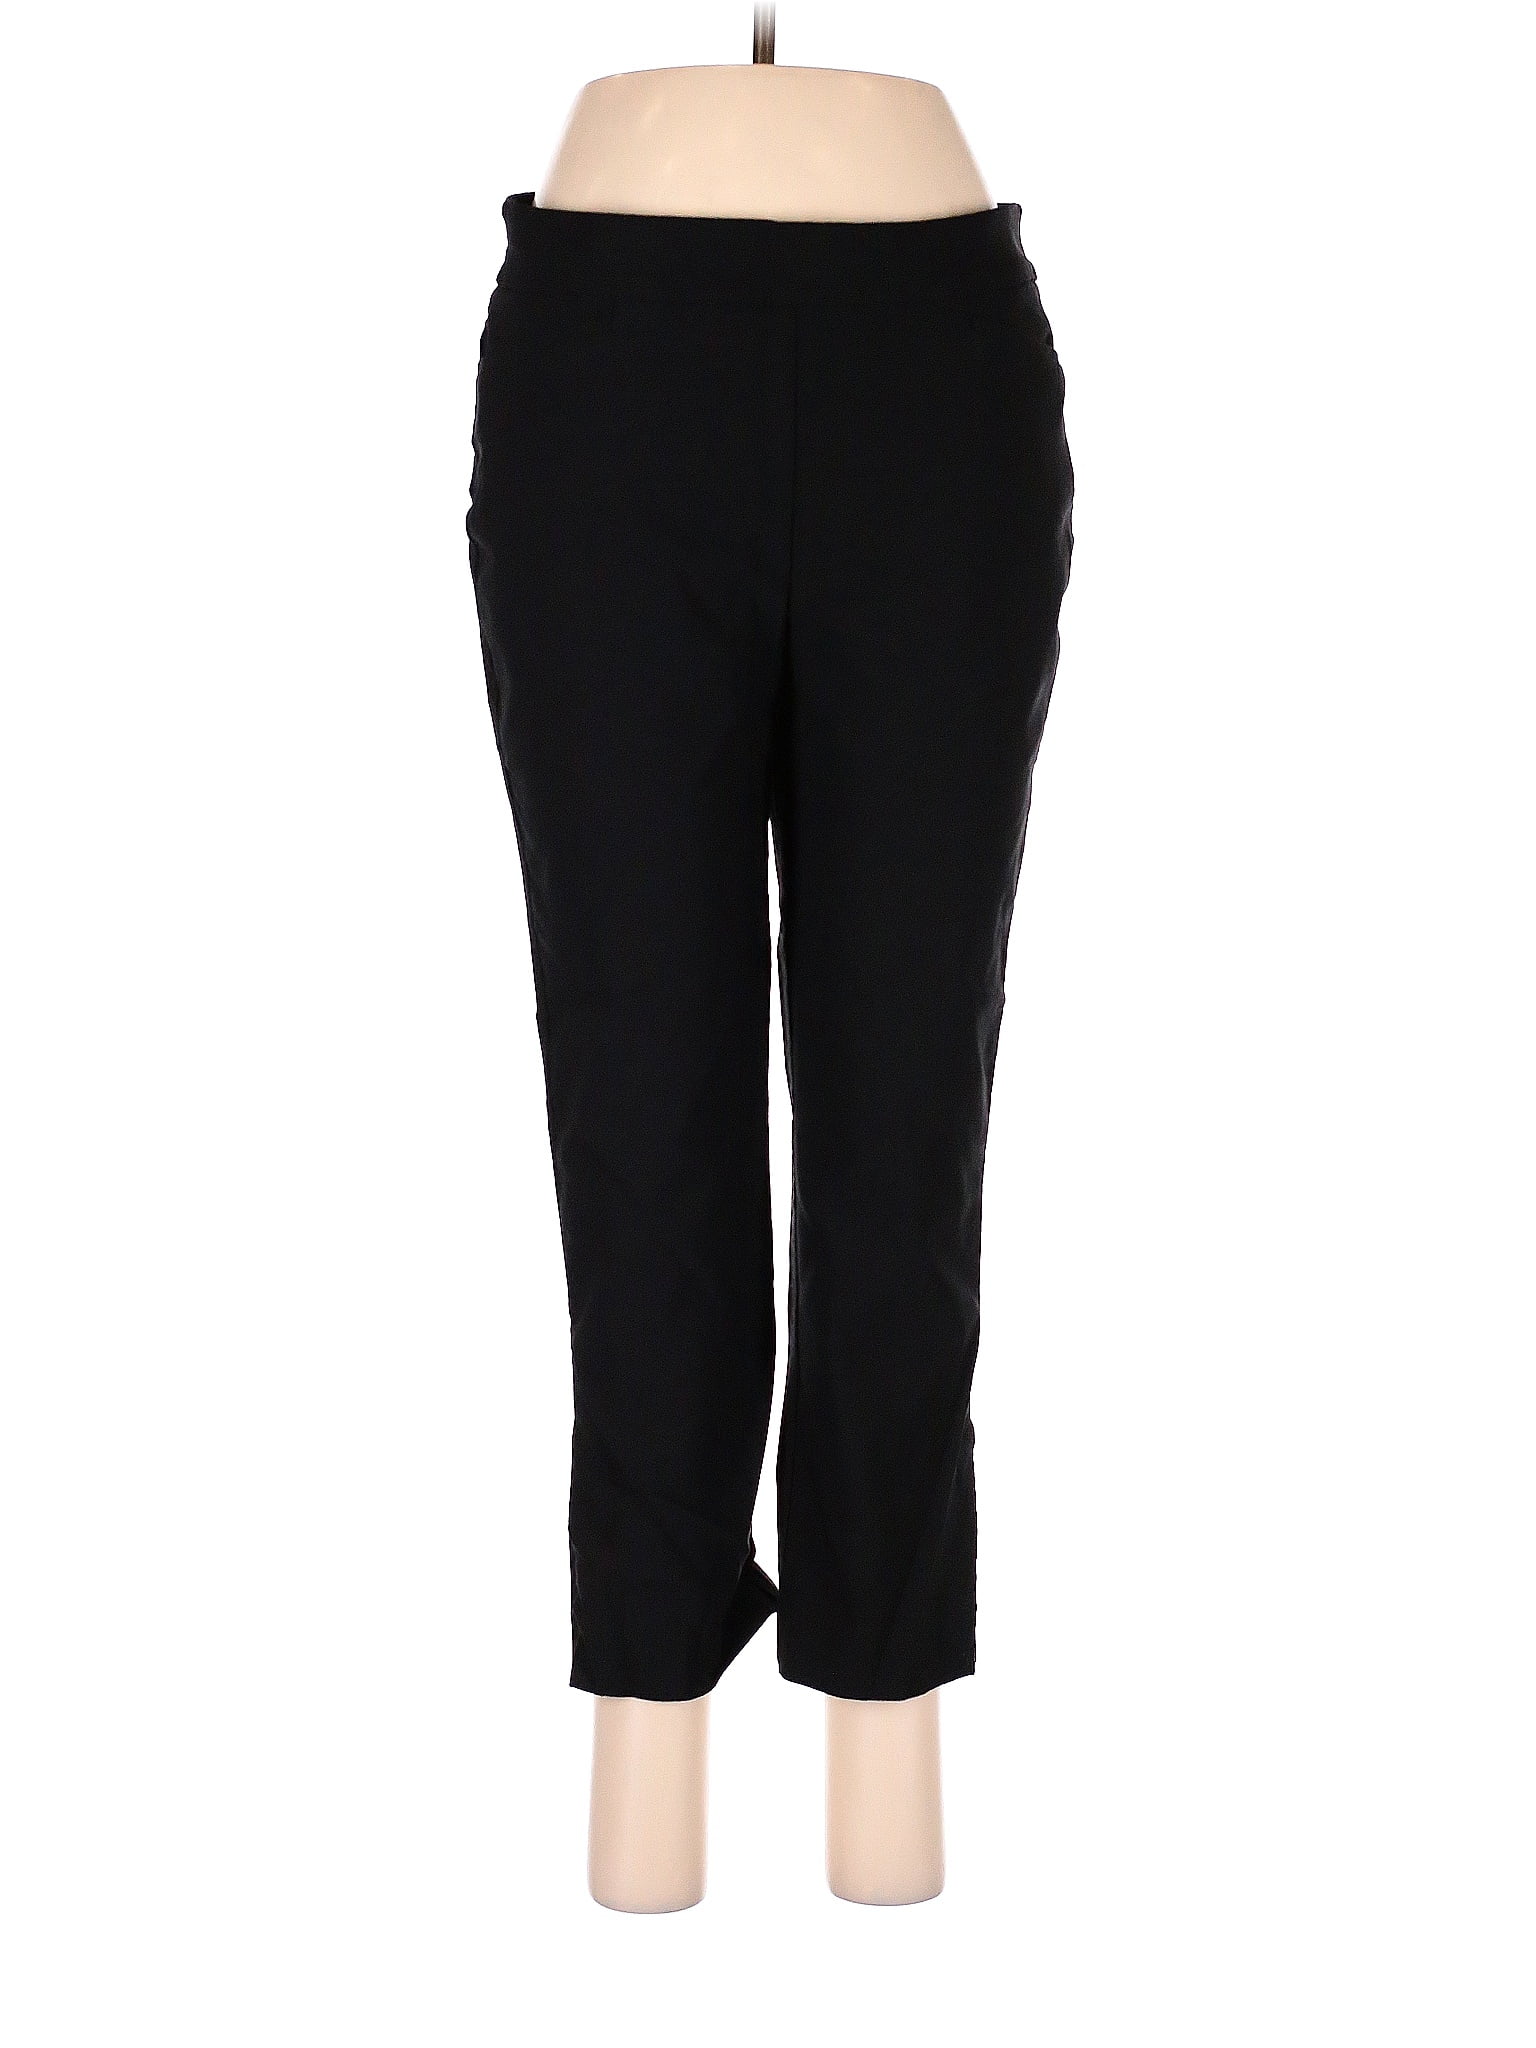 Chico's Black Casual Pants Size Med (1) - 81% off | thredUP